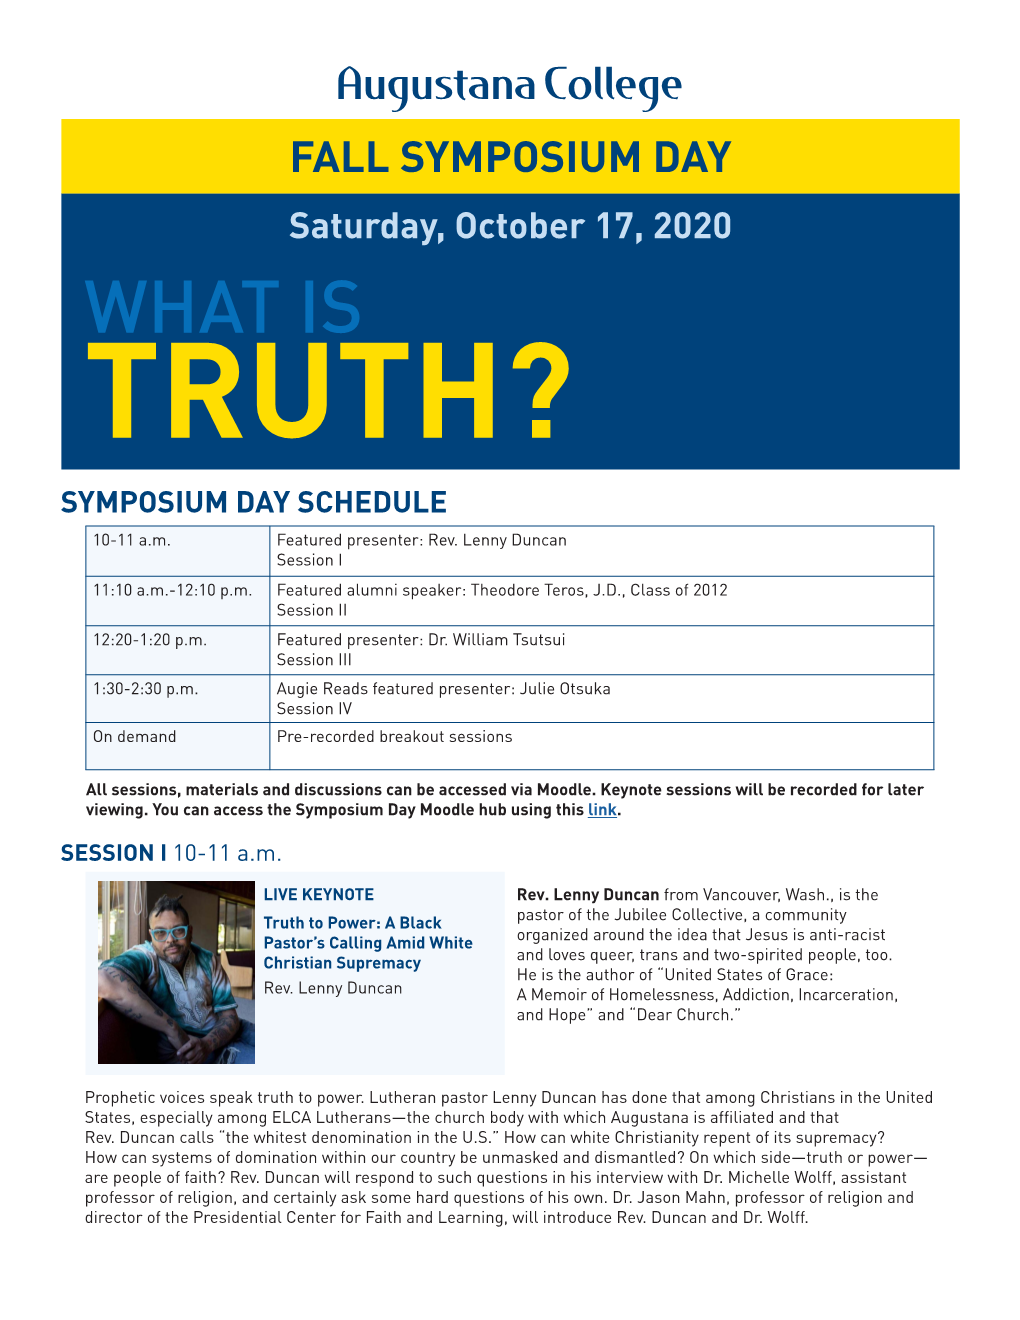 WHAT IS TRUTH? SYMPOSIUM DAY SCHEDULE 10-11 A.M